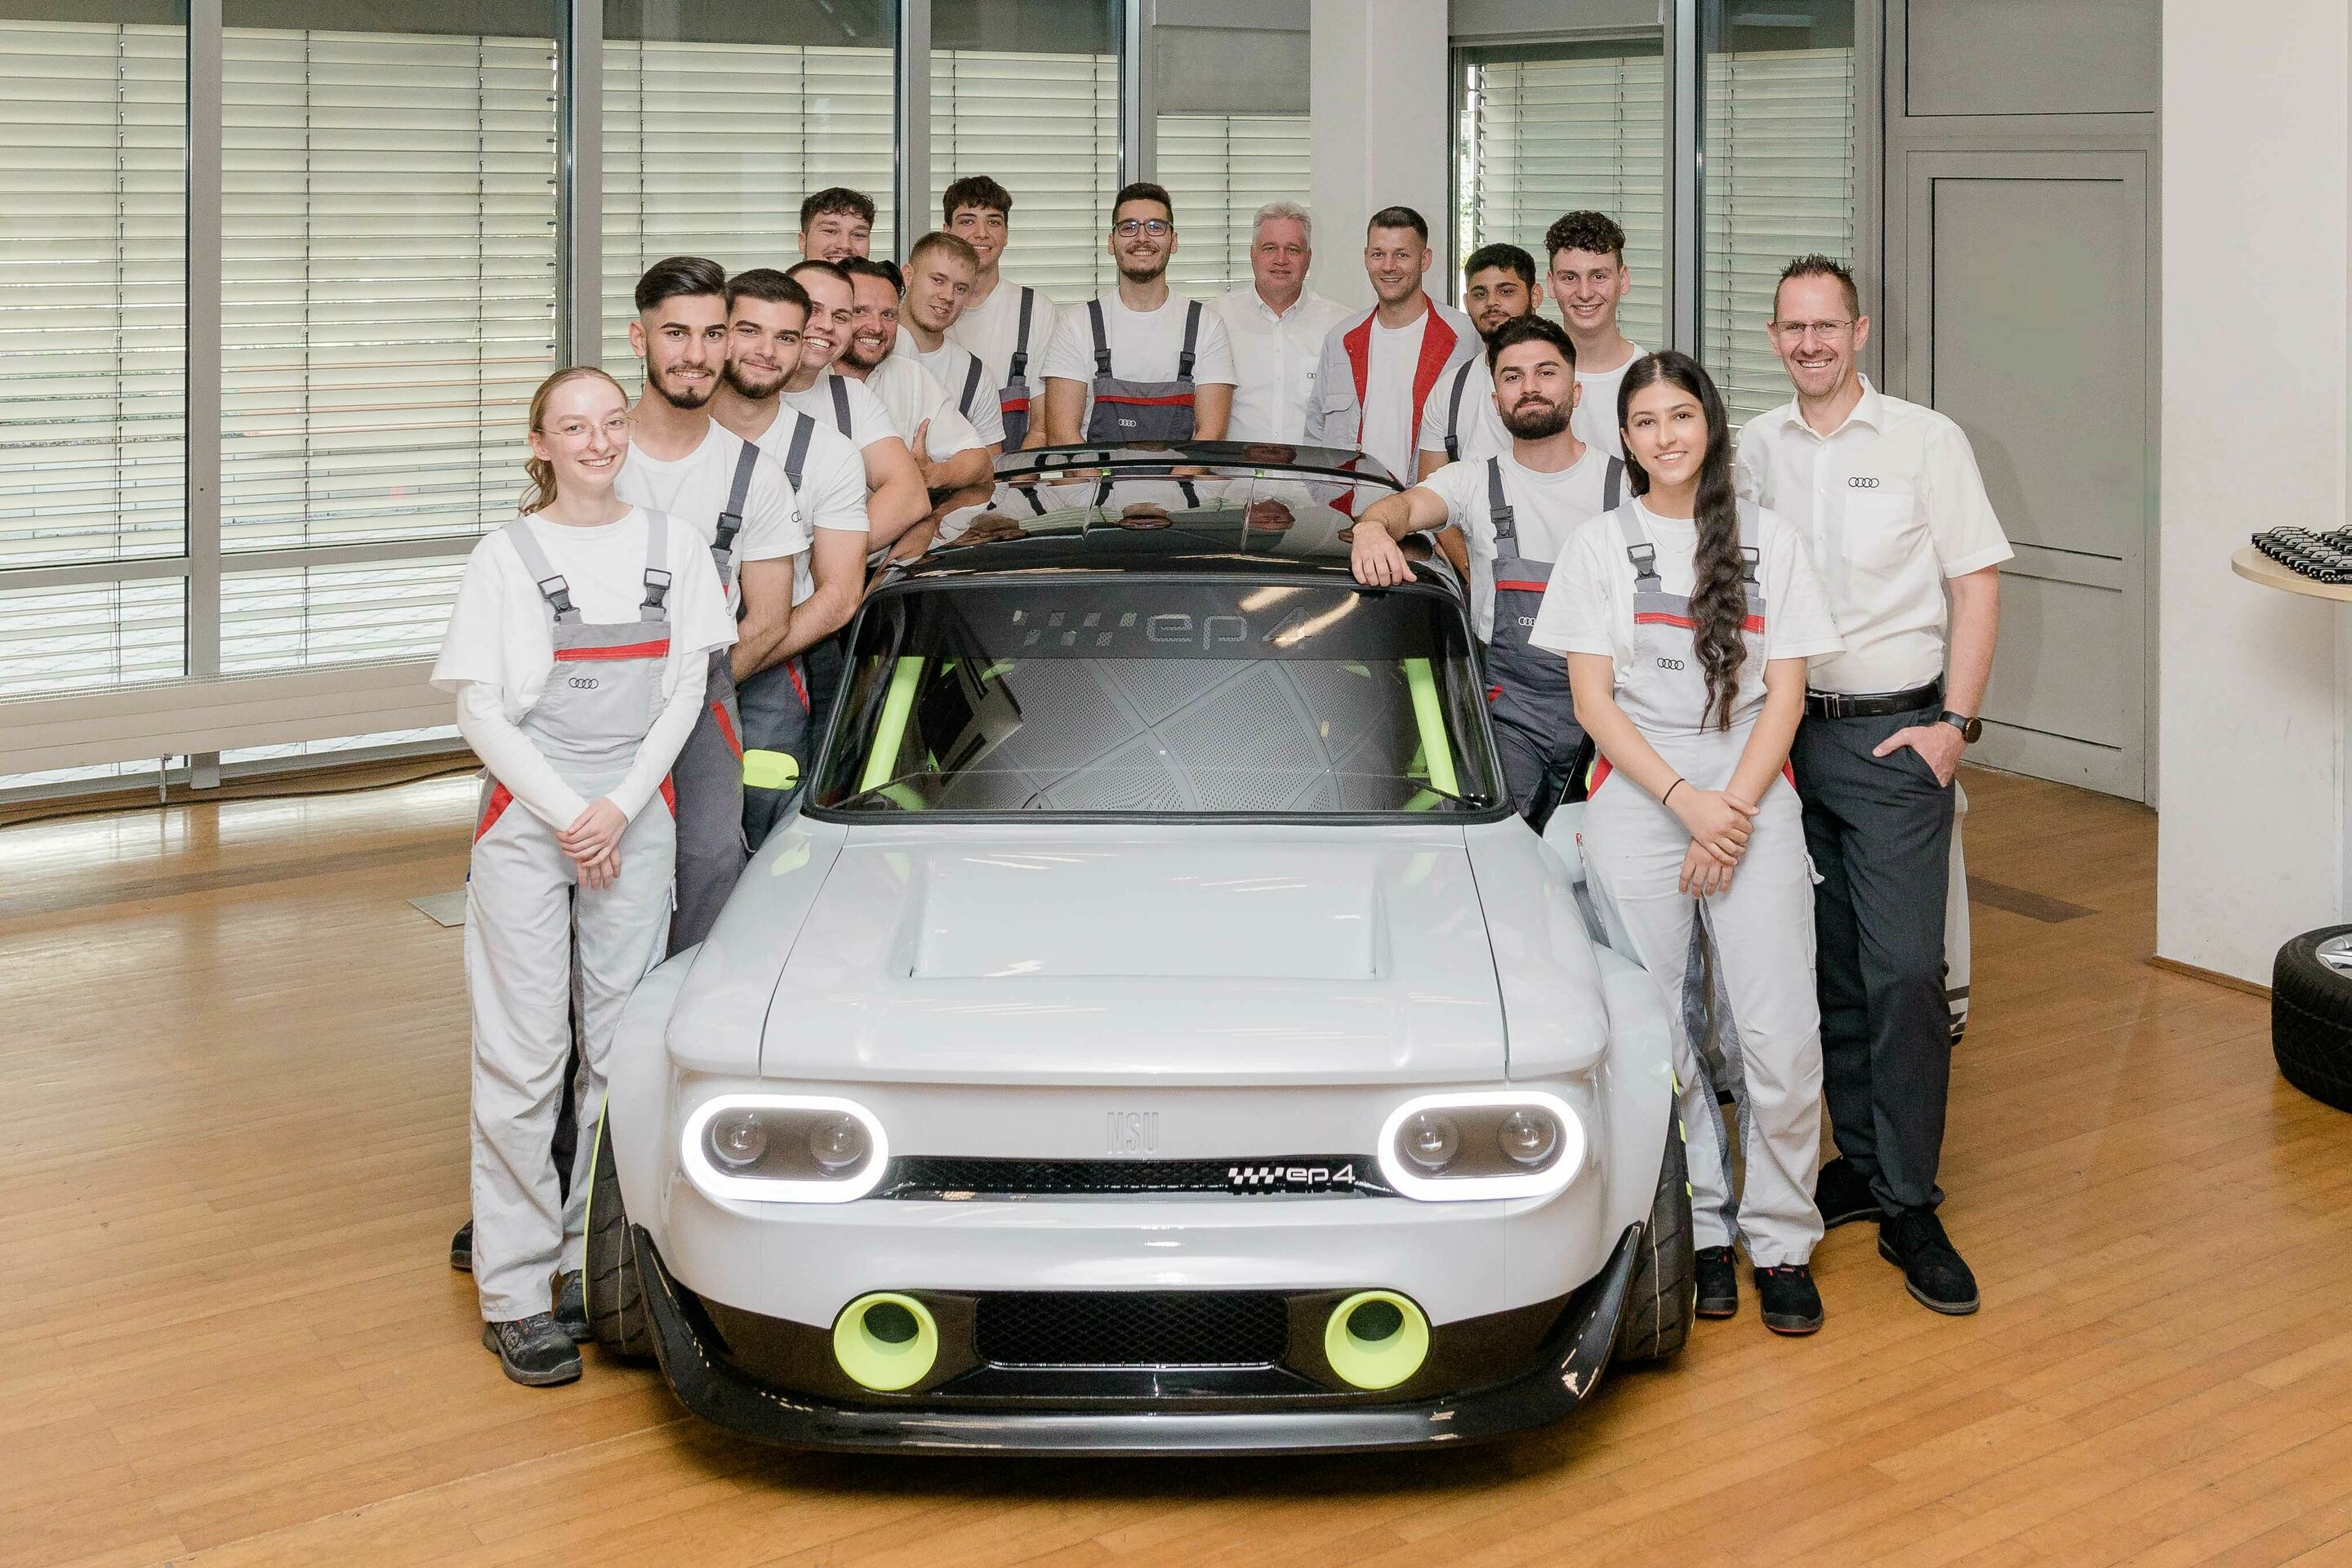 Trainee project at Audi Neckarsulm